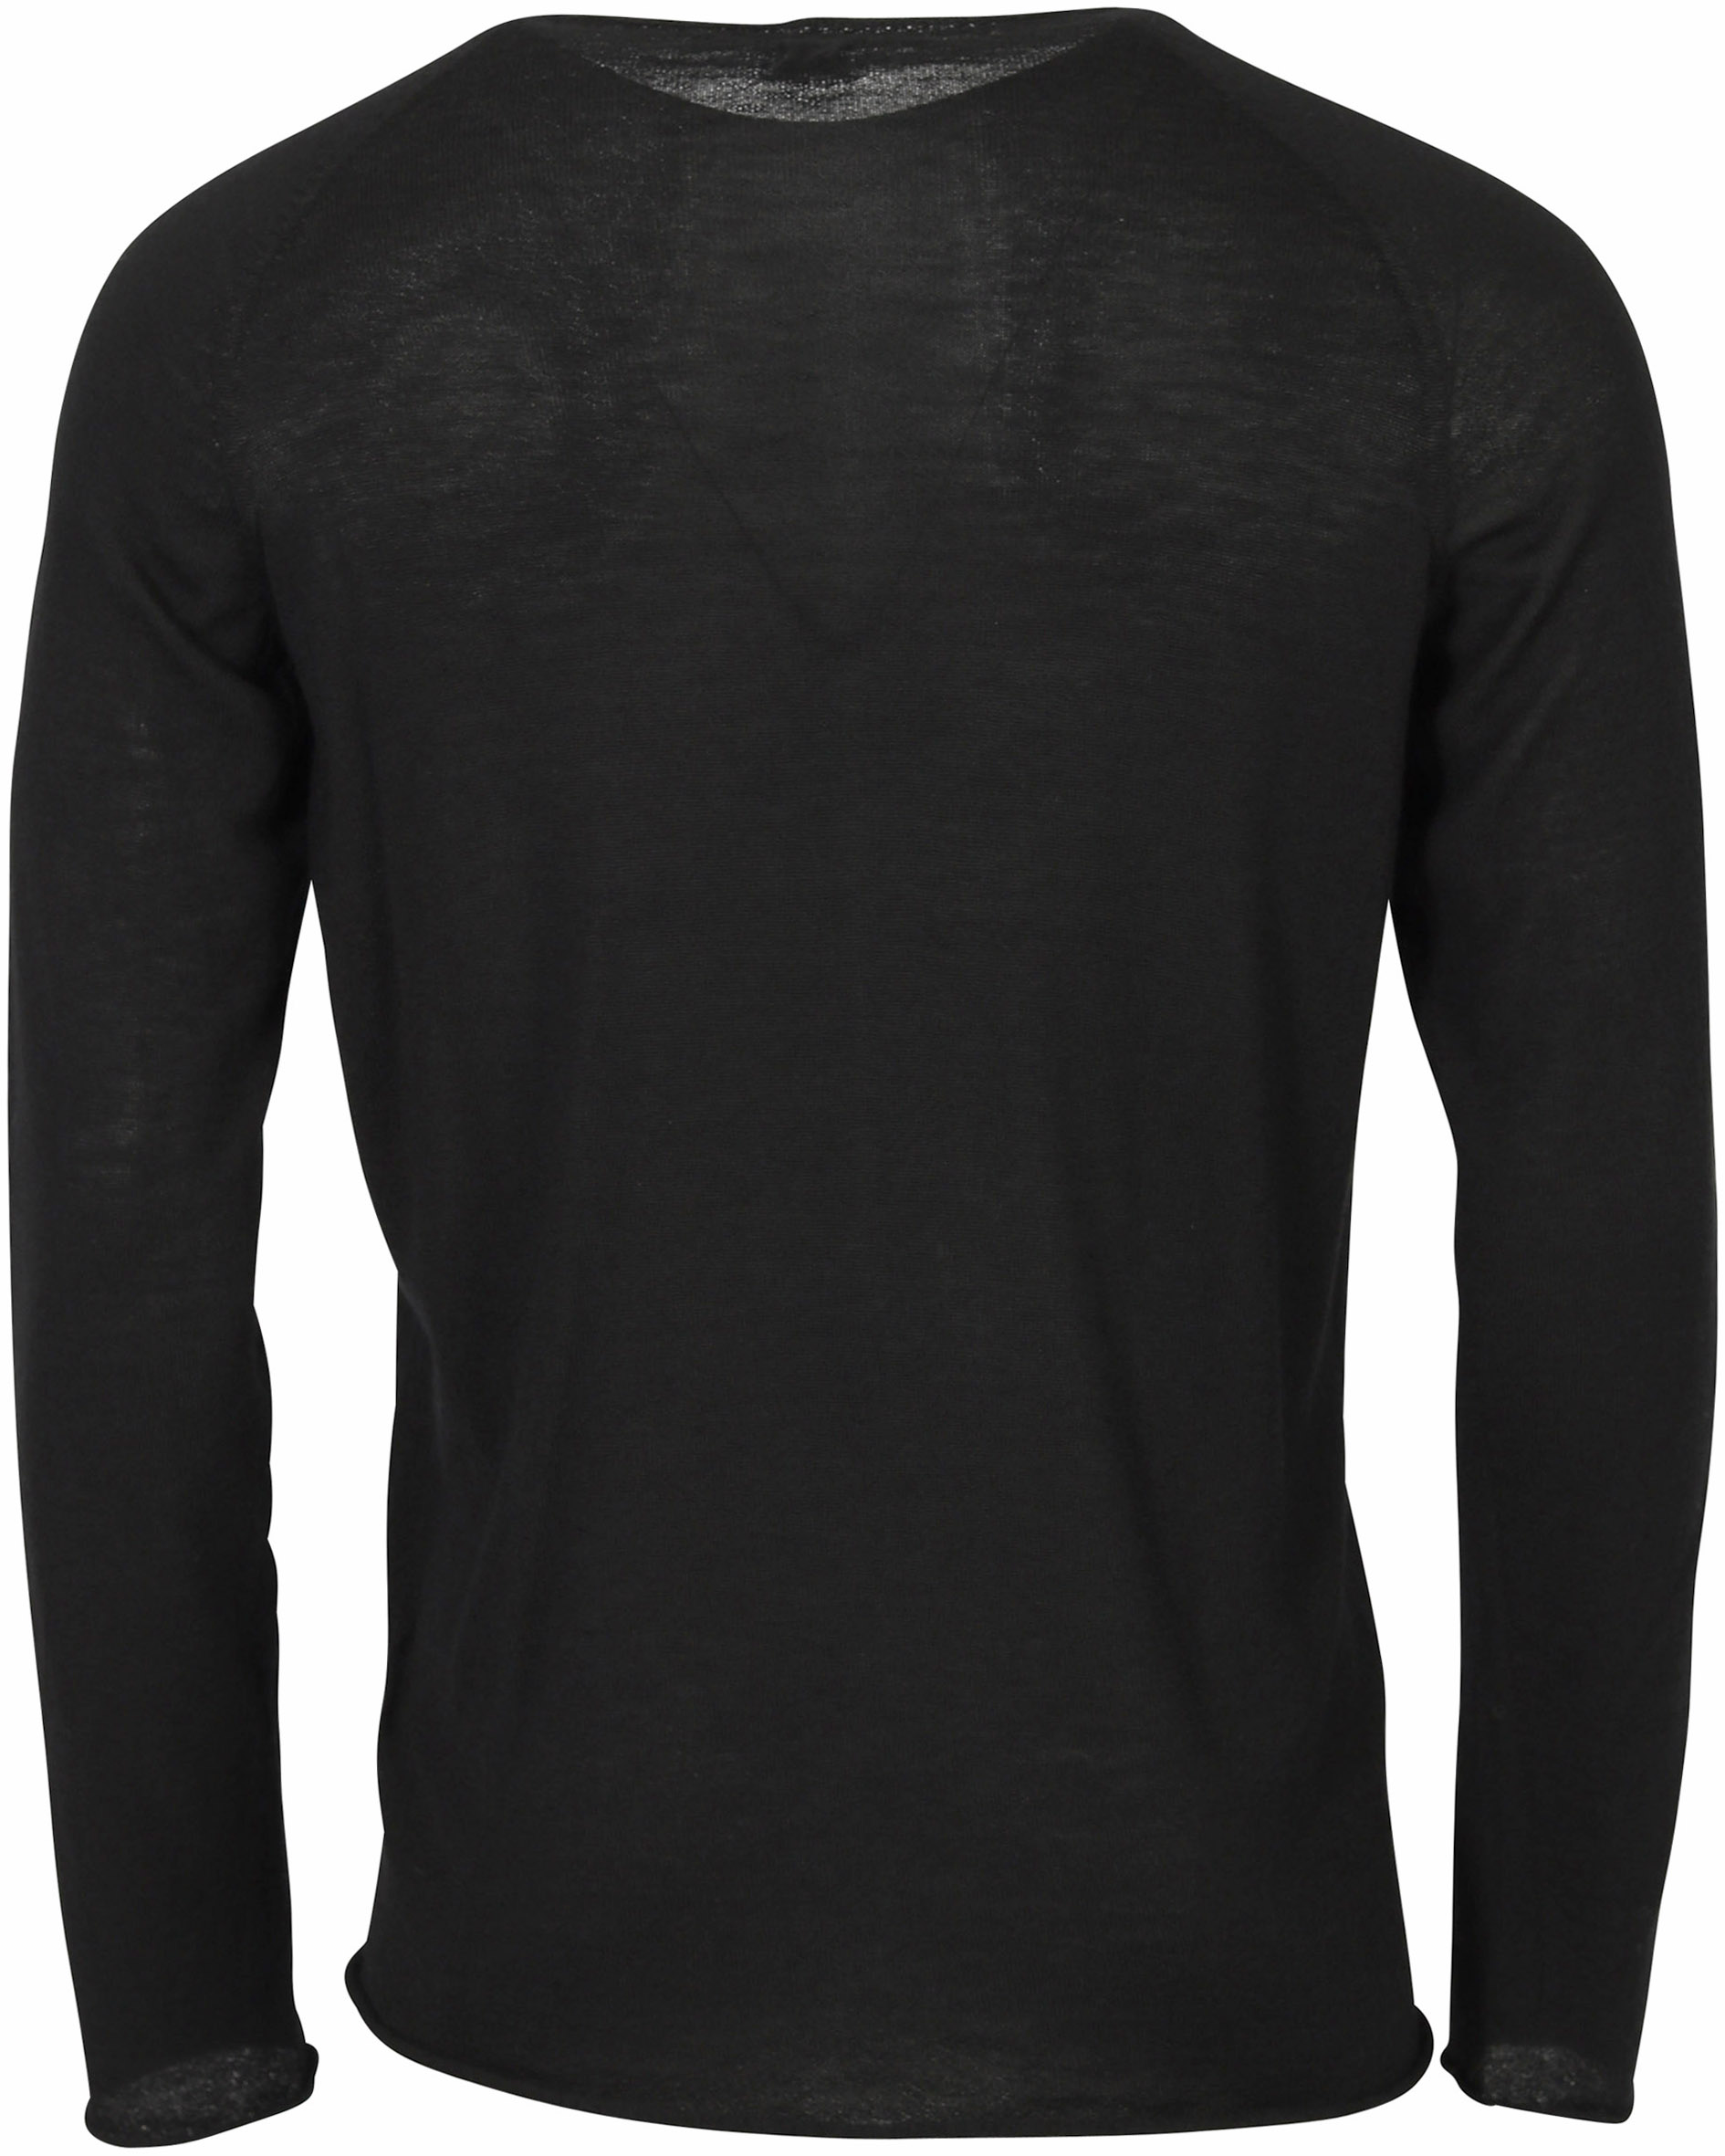 Hannes Roether Cashmere Pullover Black